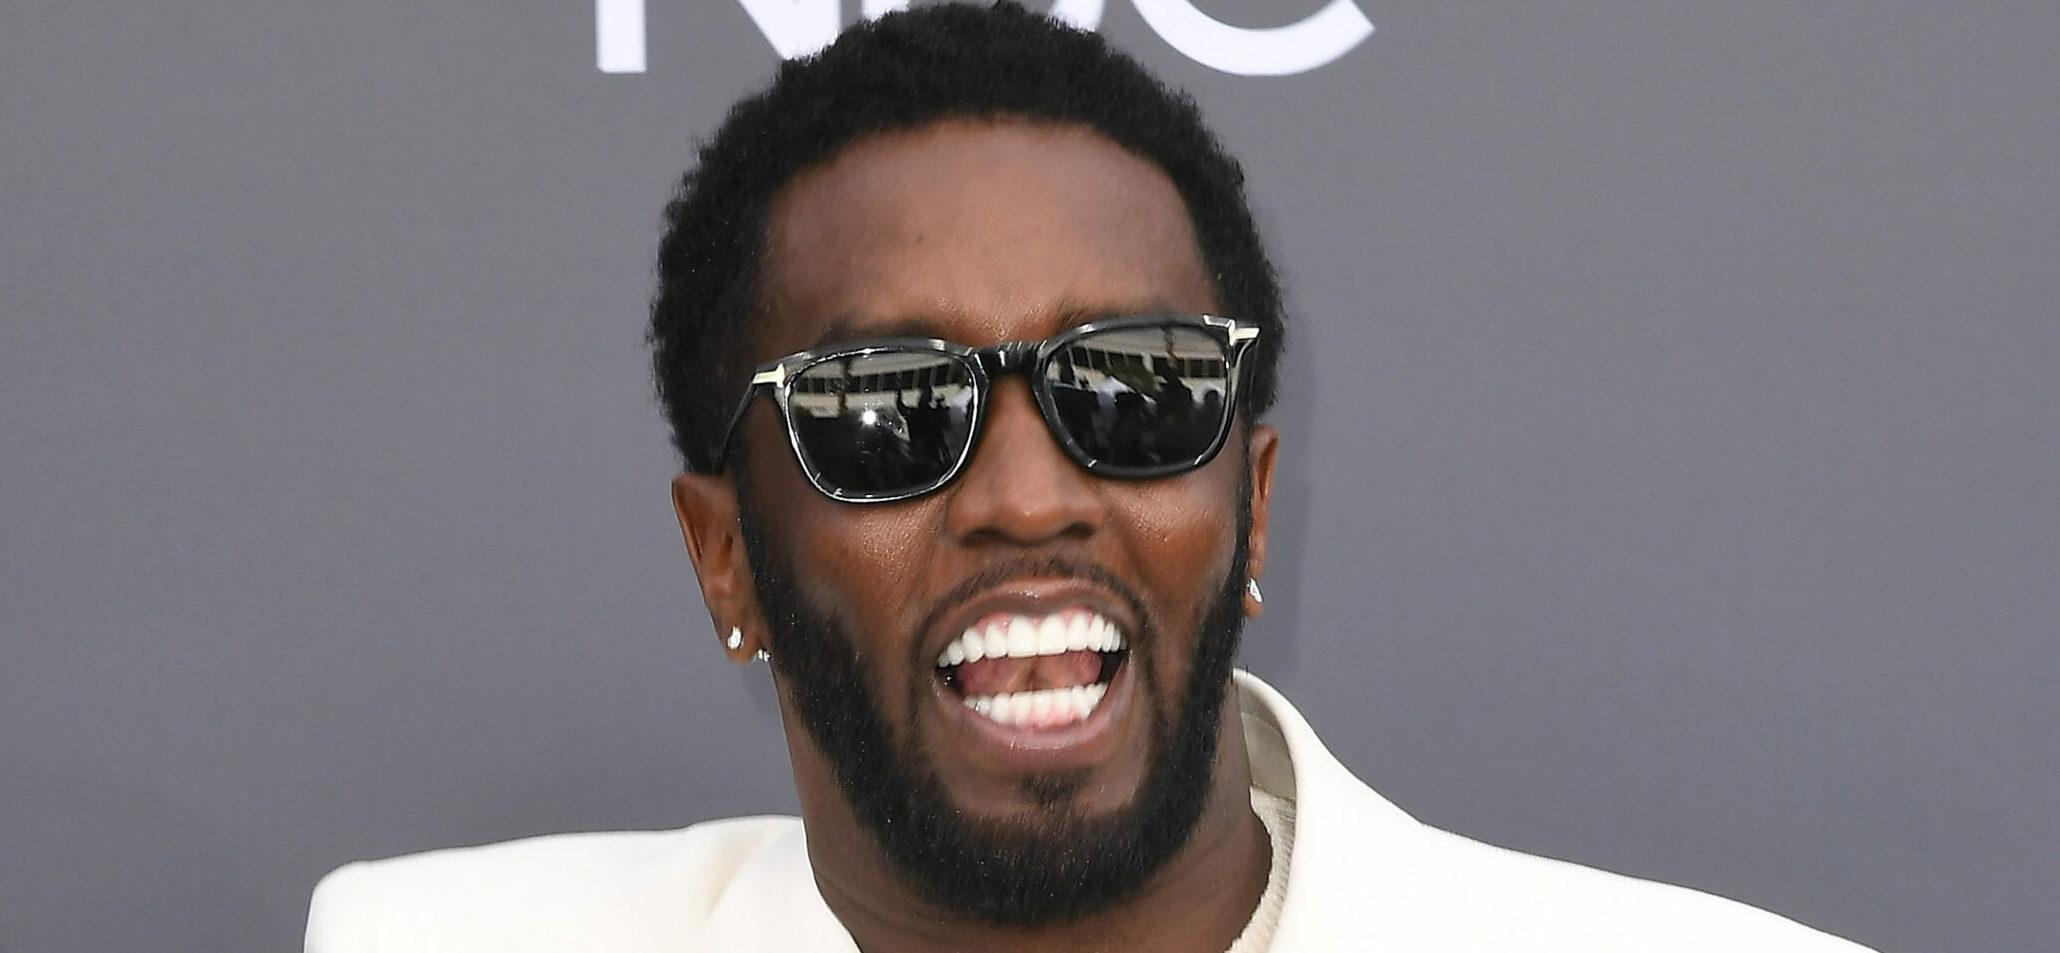 Diddy Is A Proud Dad As Daughter Love Hits New Impressive Milestone: ‘Breaking News’